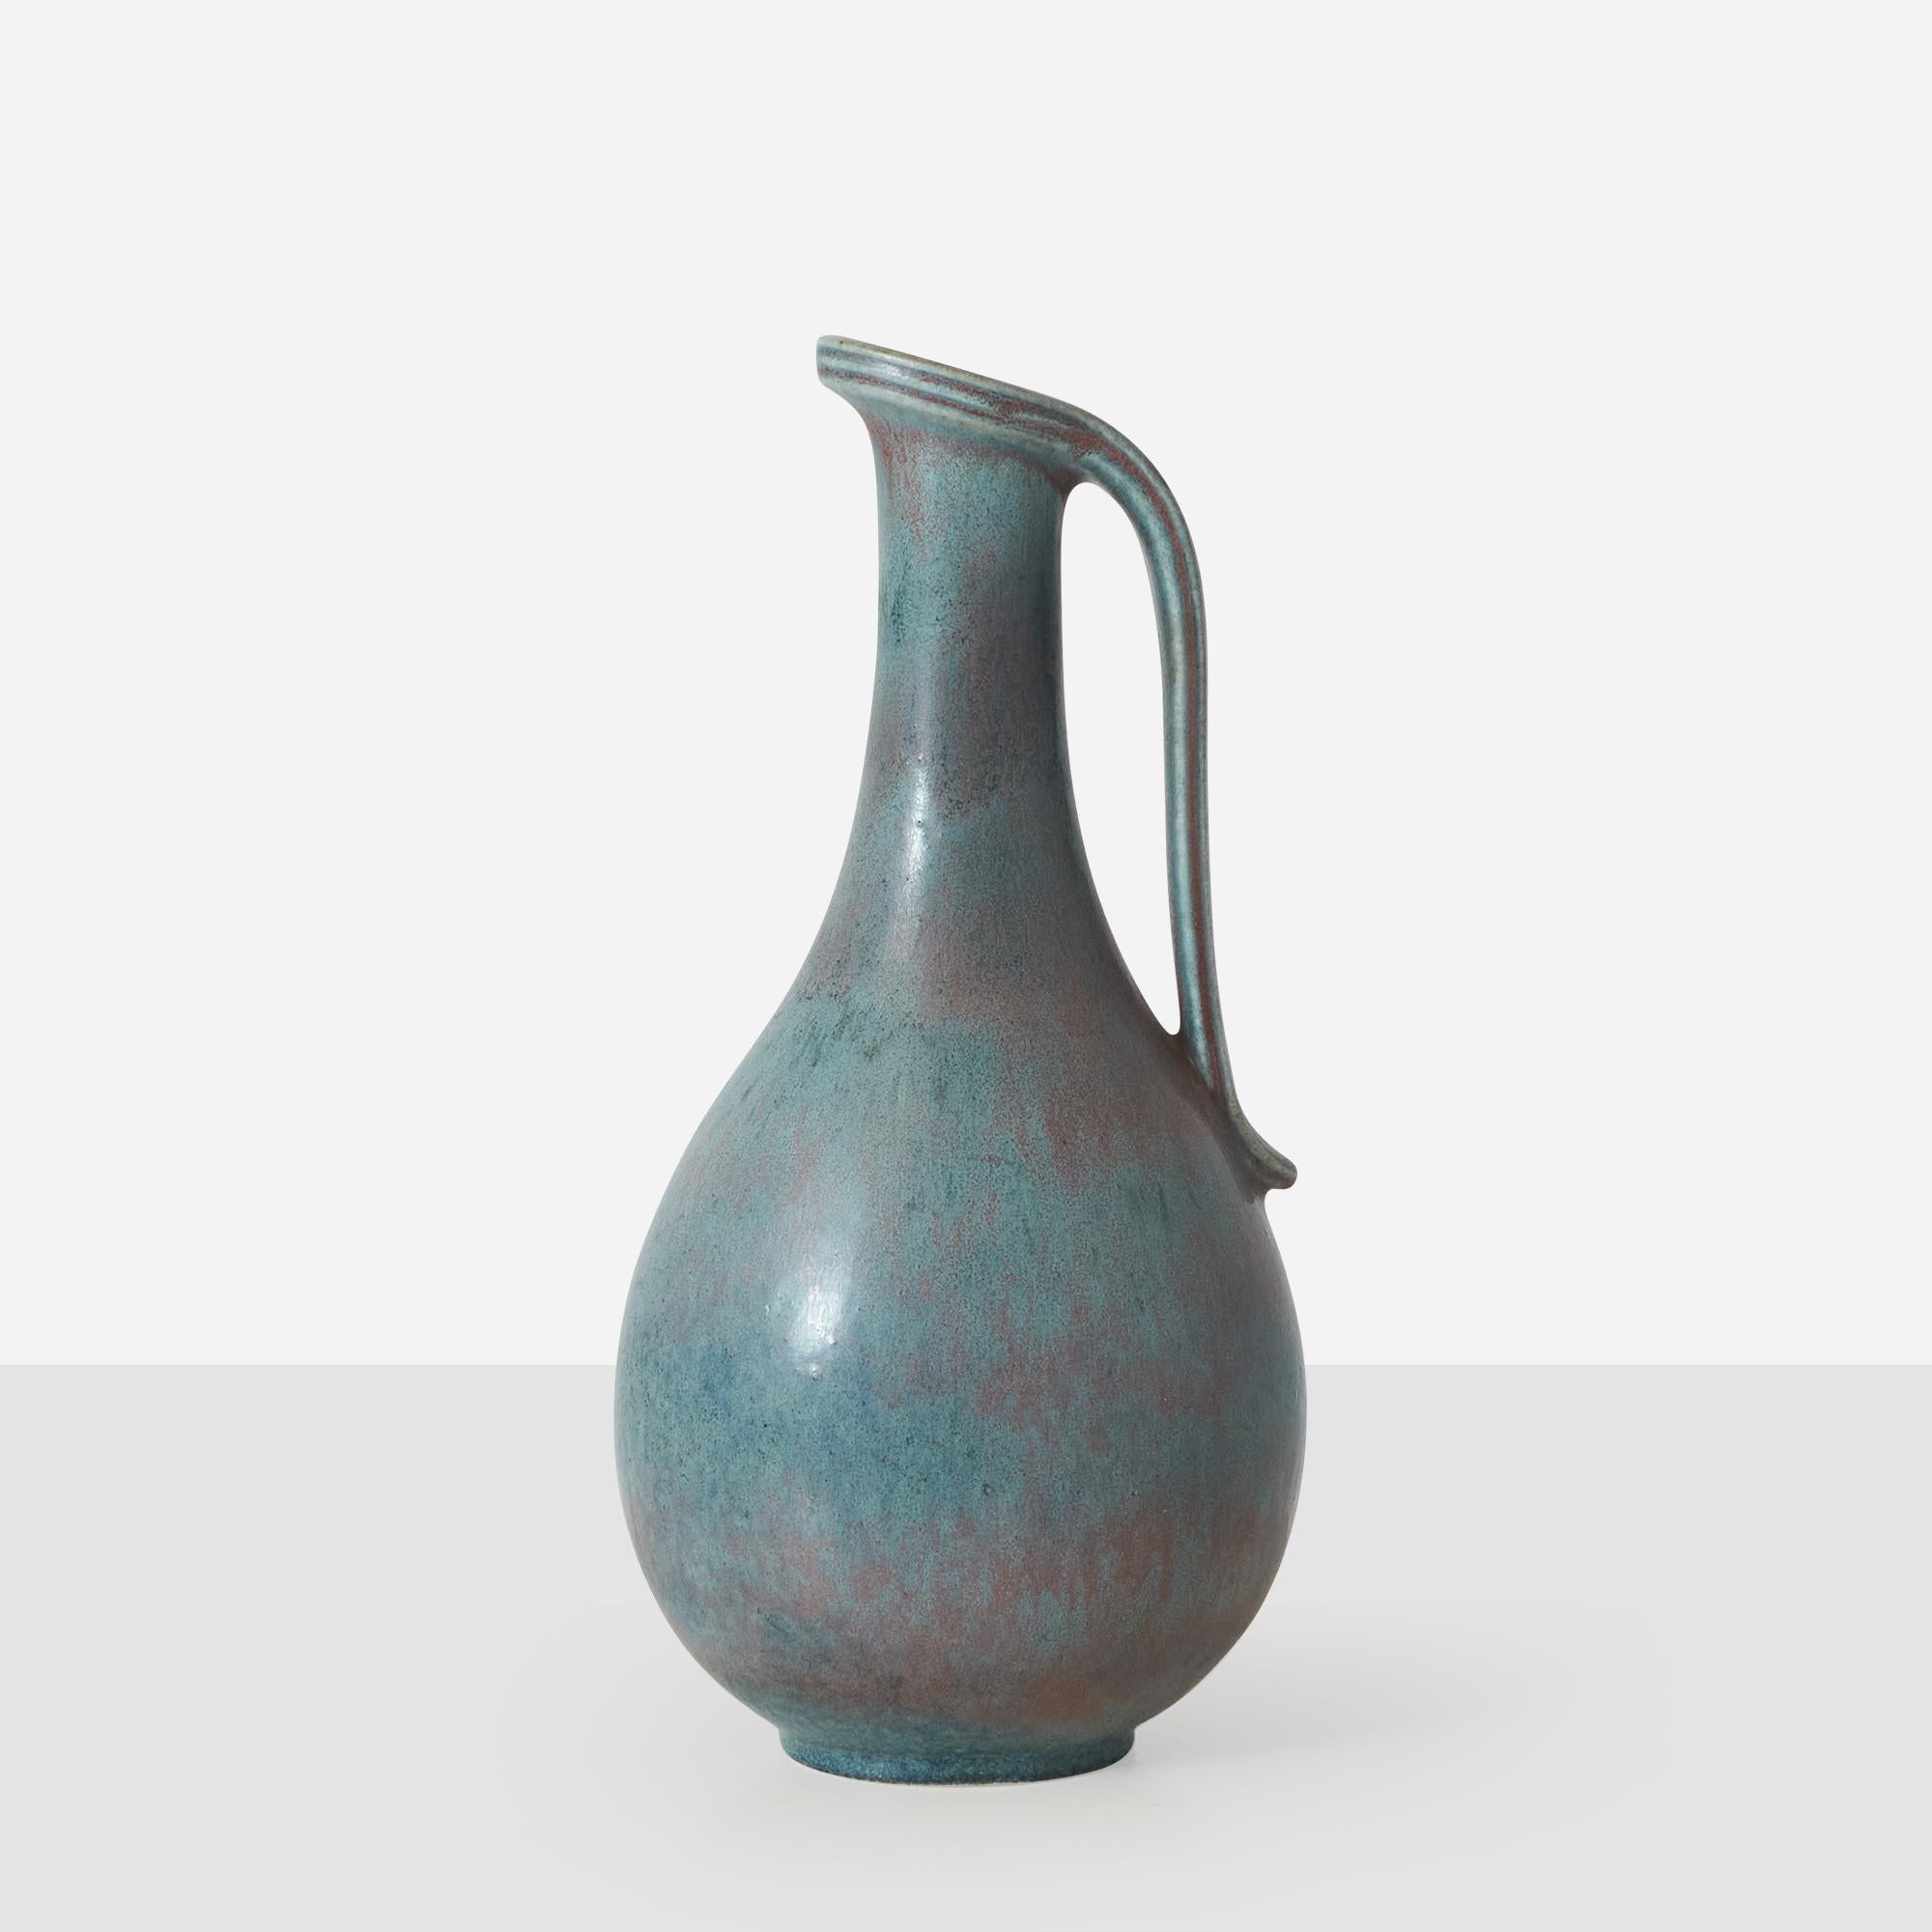 A small pitcher or vase in hare's fur blue glaze by Gunnar Nylund for Rorstrand. Impressed on the bottom by both the creator and manufacturer's mark. 